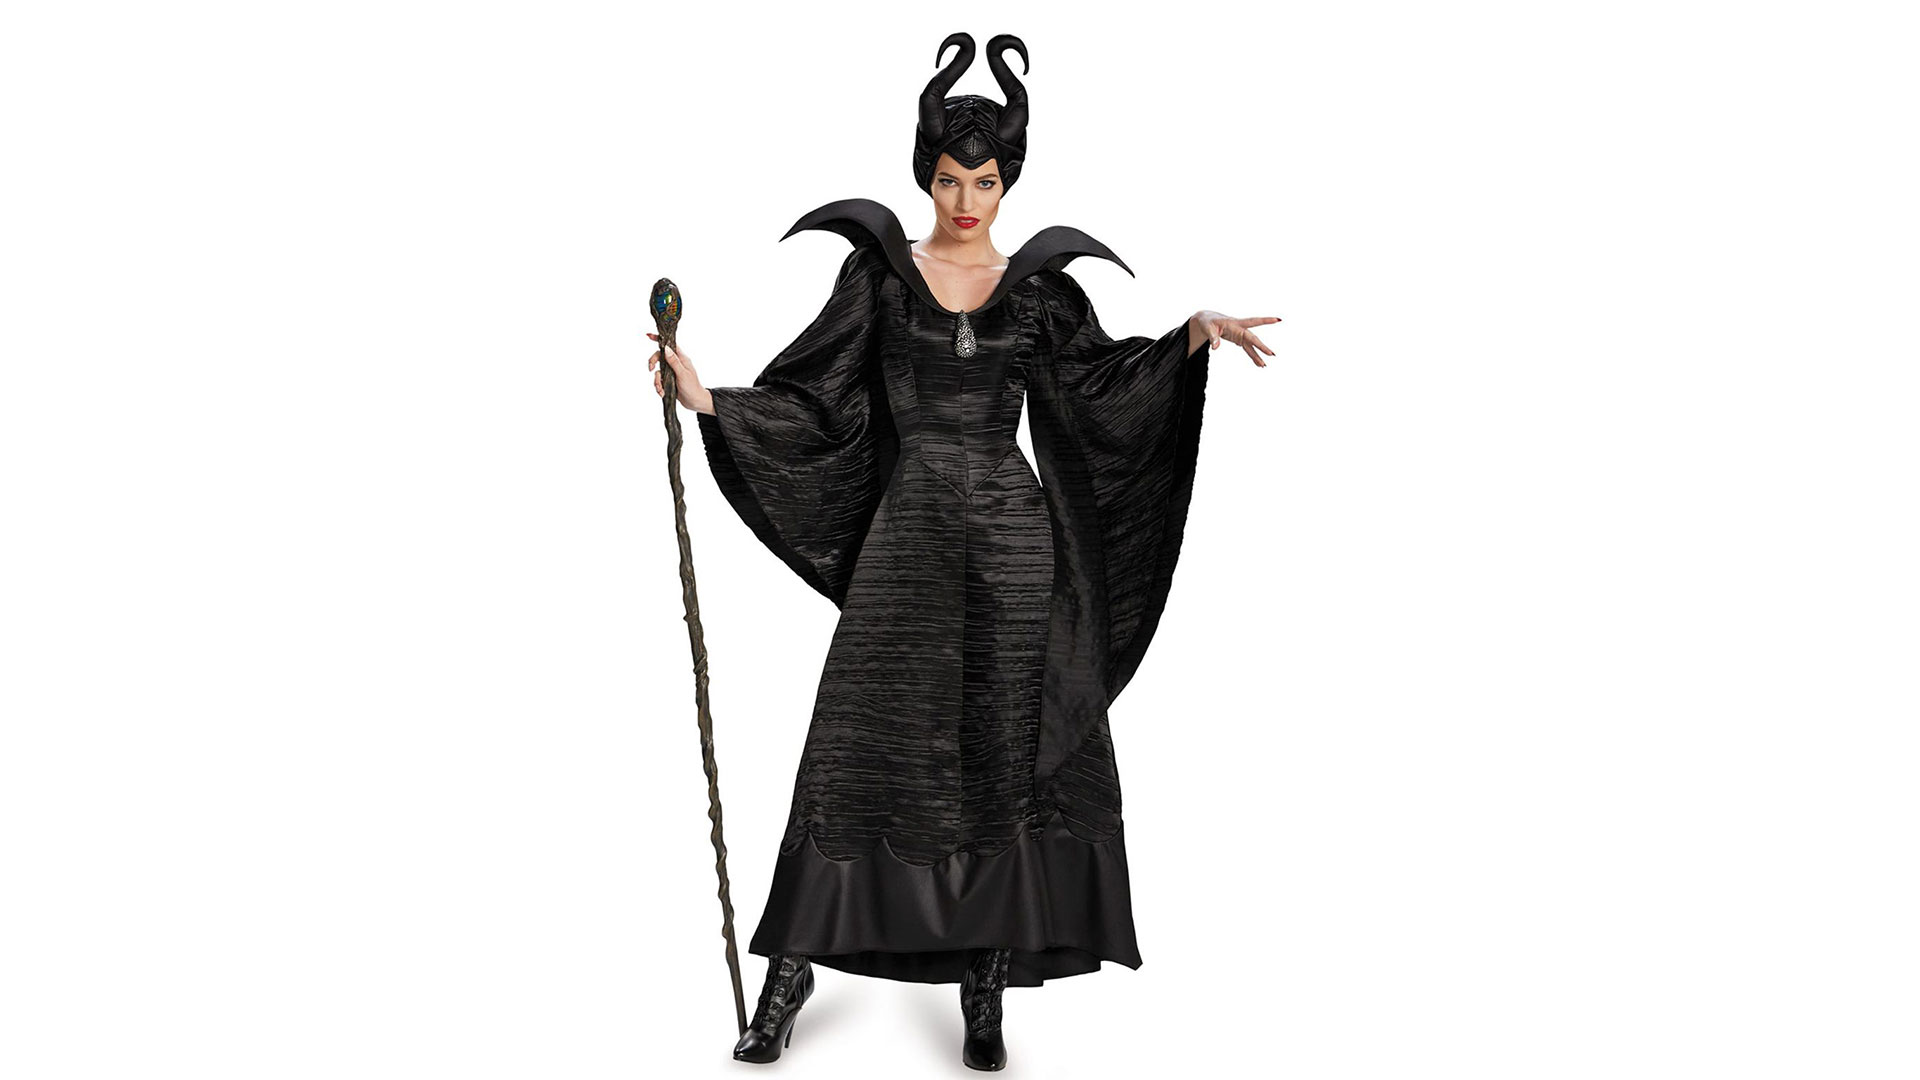 Couple dressed up as characters from Maleficent for Halloween.